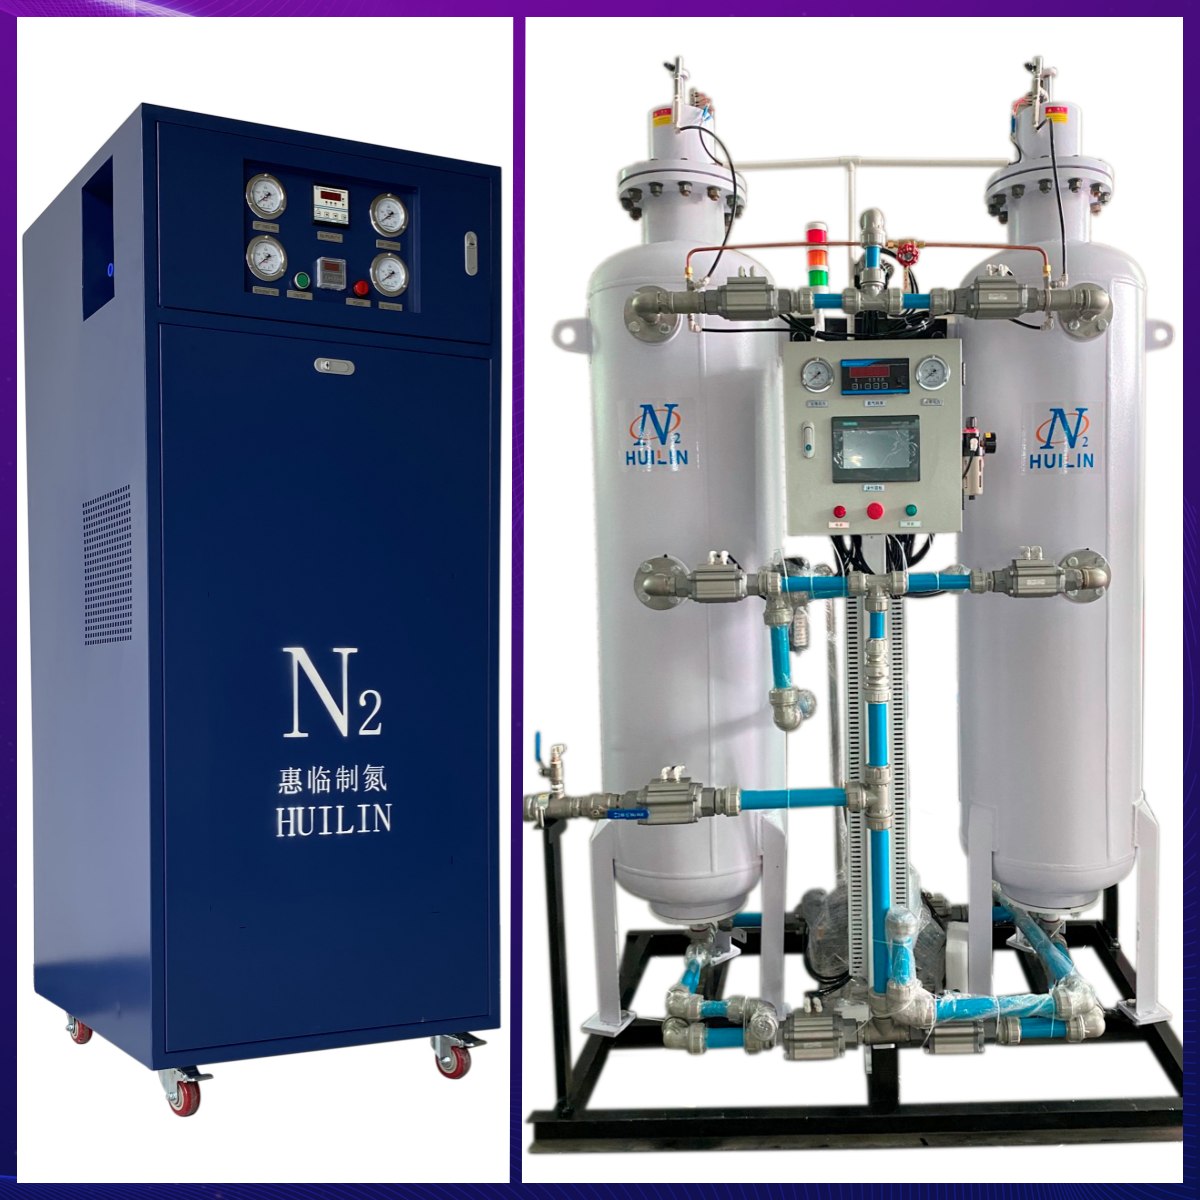 The requirements of nitrogen purity in various industries